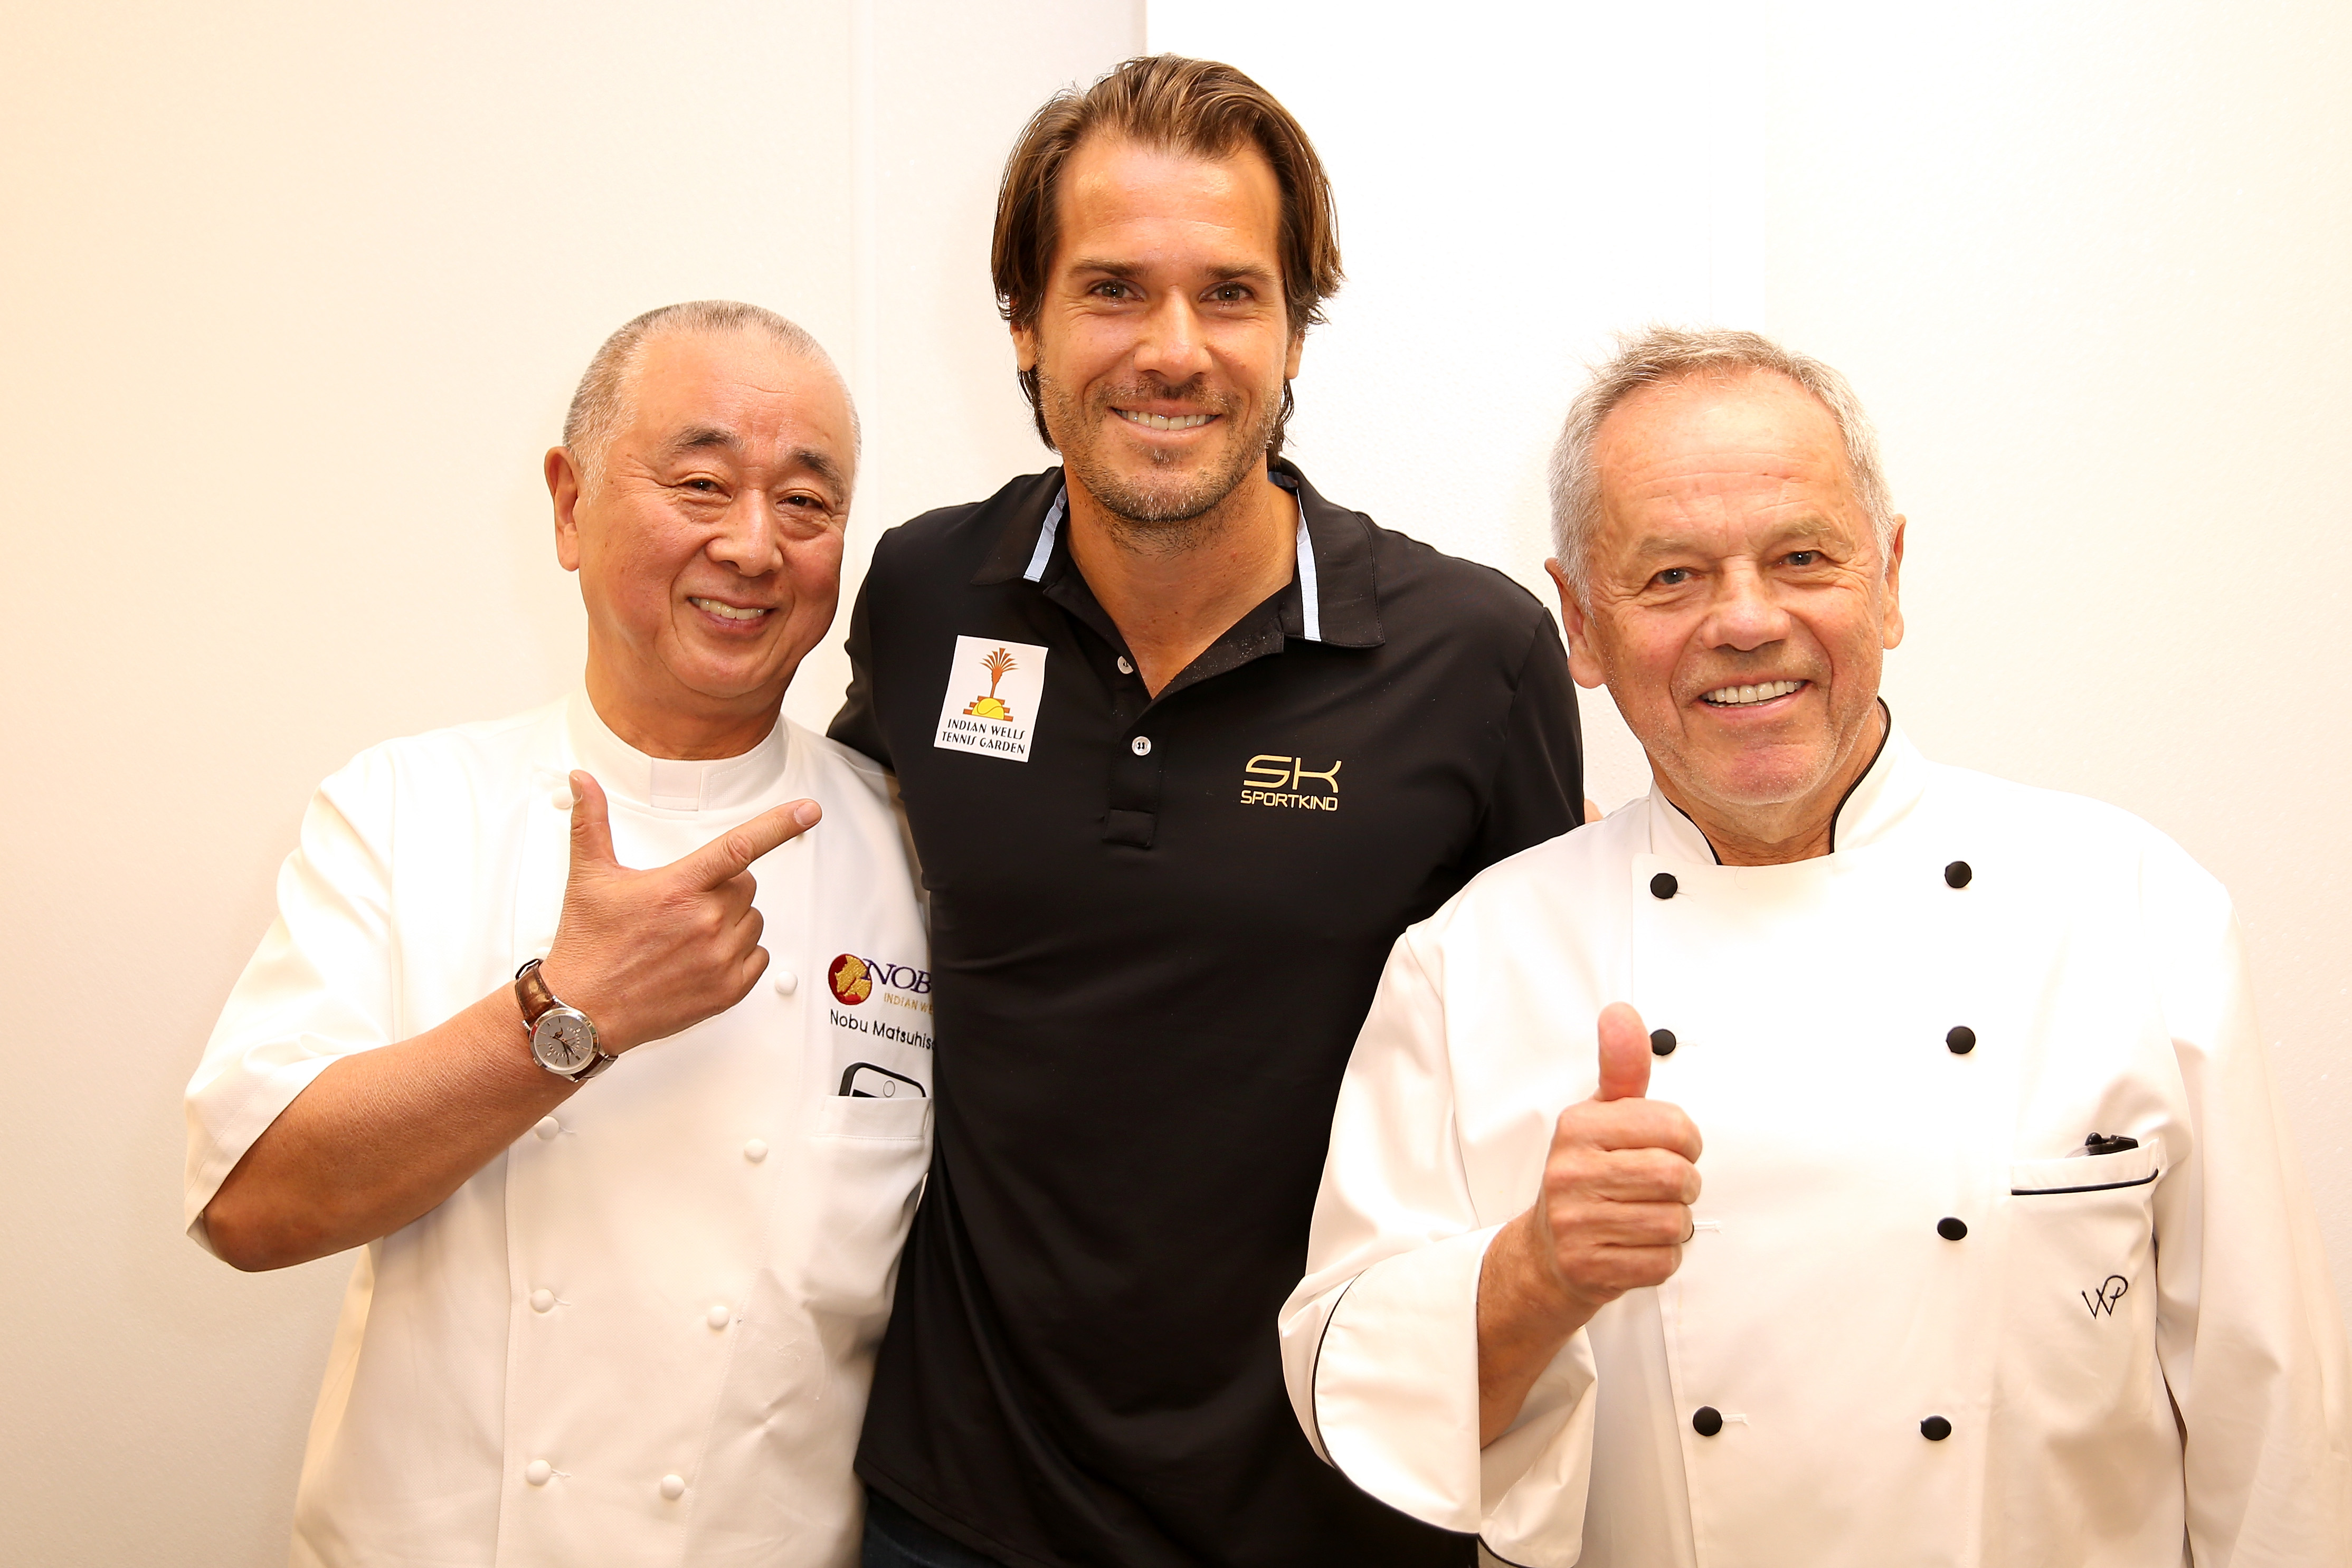 INDIAN WELLS, CA - MARCH 07:  Tournament director Tommy Haas poses with celebrity chefs Nobu Matsuhisa and Wolfgang  Puck during the BNP Paribas Open at the Indian Wells Tennis Garden on March 7, 2017 in Indian Wells, California.  (Photo by Matthew Stockman/Getty Images)